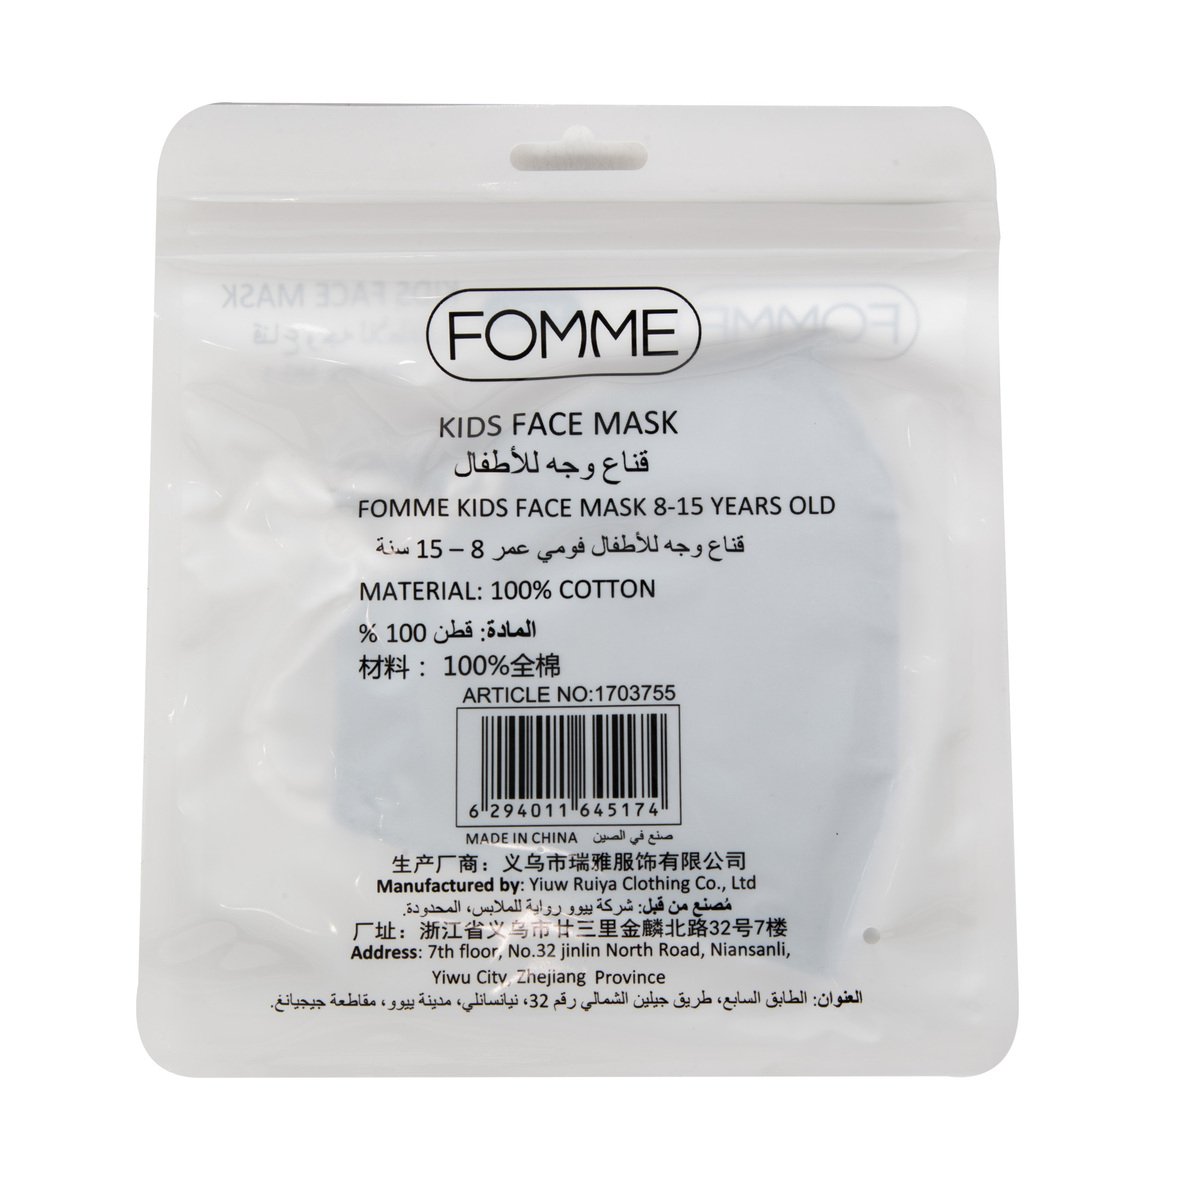 Fomme Kids Face Mask MG-1 1pc